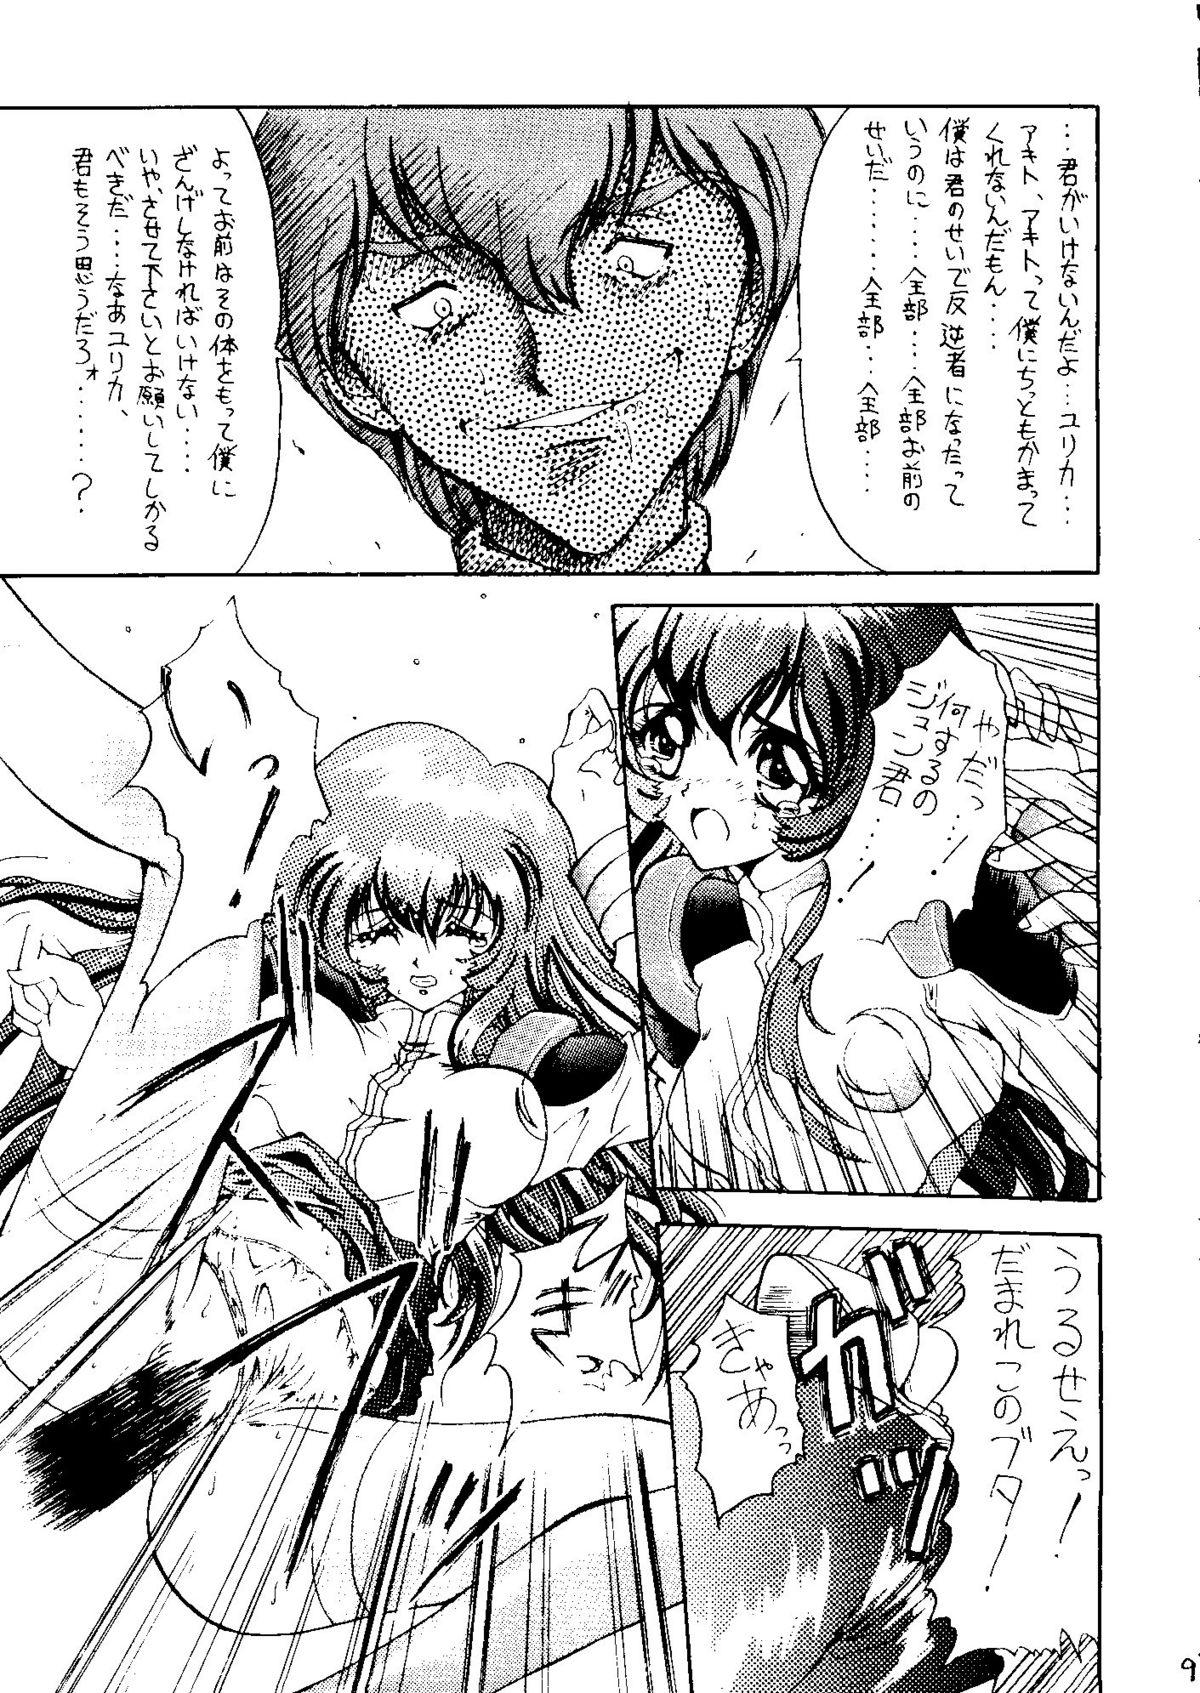 Jerkoff AREX Special Version - Neon genesis evangelion Martian successor nadesico World masterpiece theater Remi nobodys girl Hot Girl - Page 8